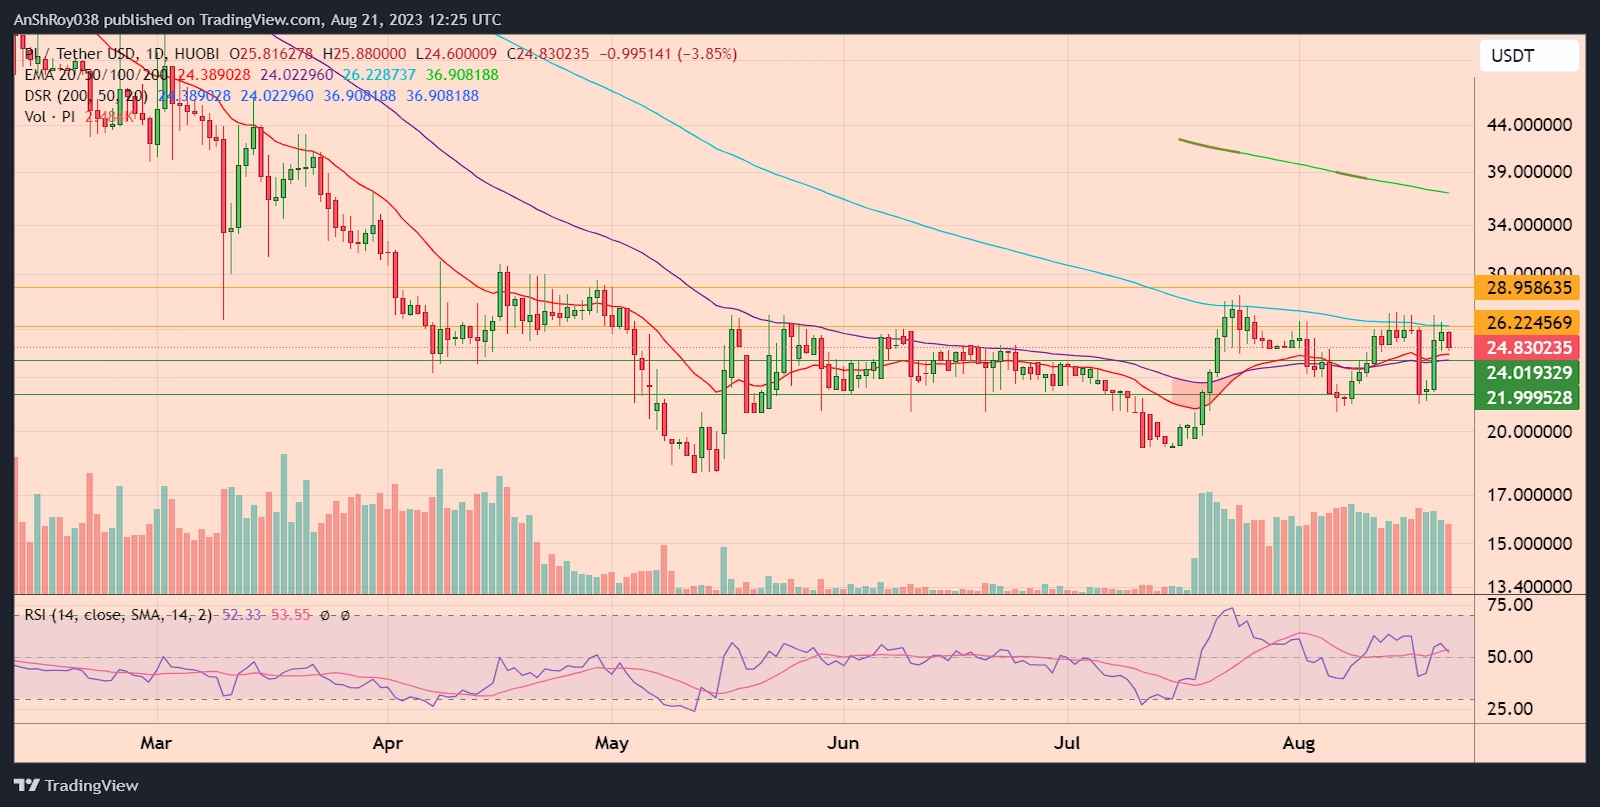 PIUSDT daily price chart with RSI. 